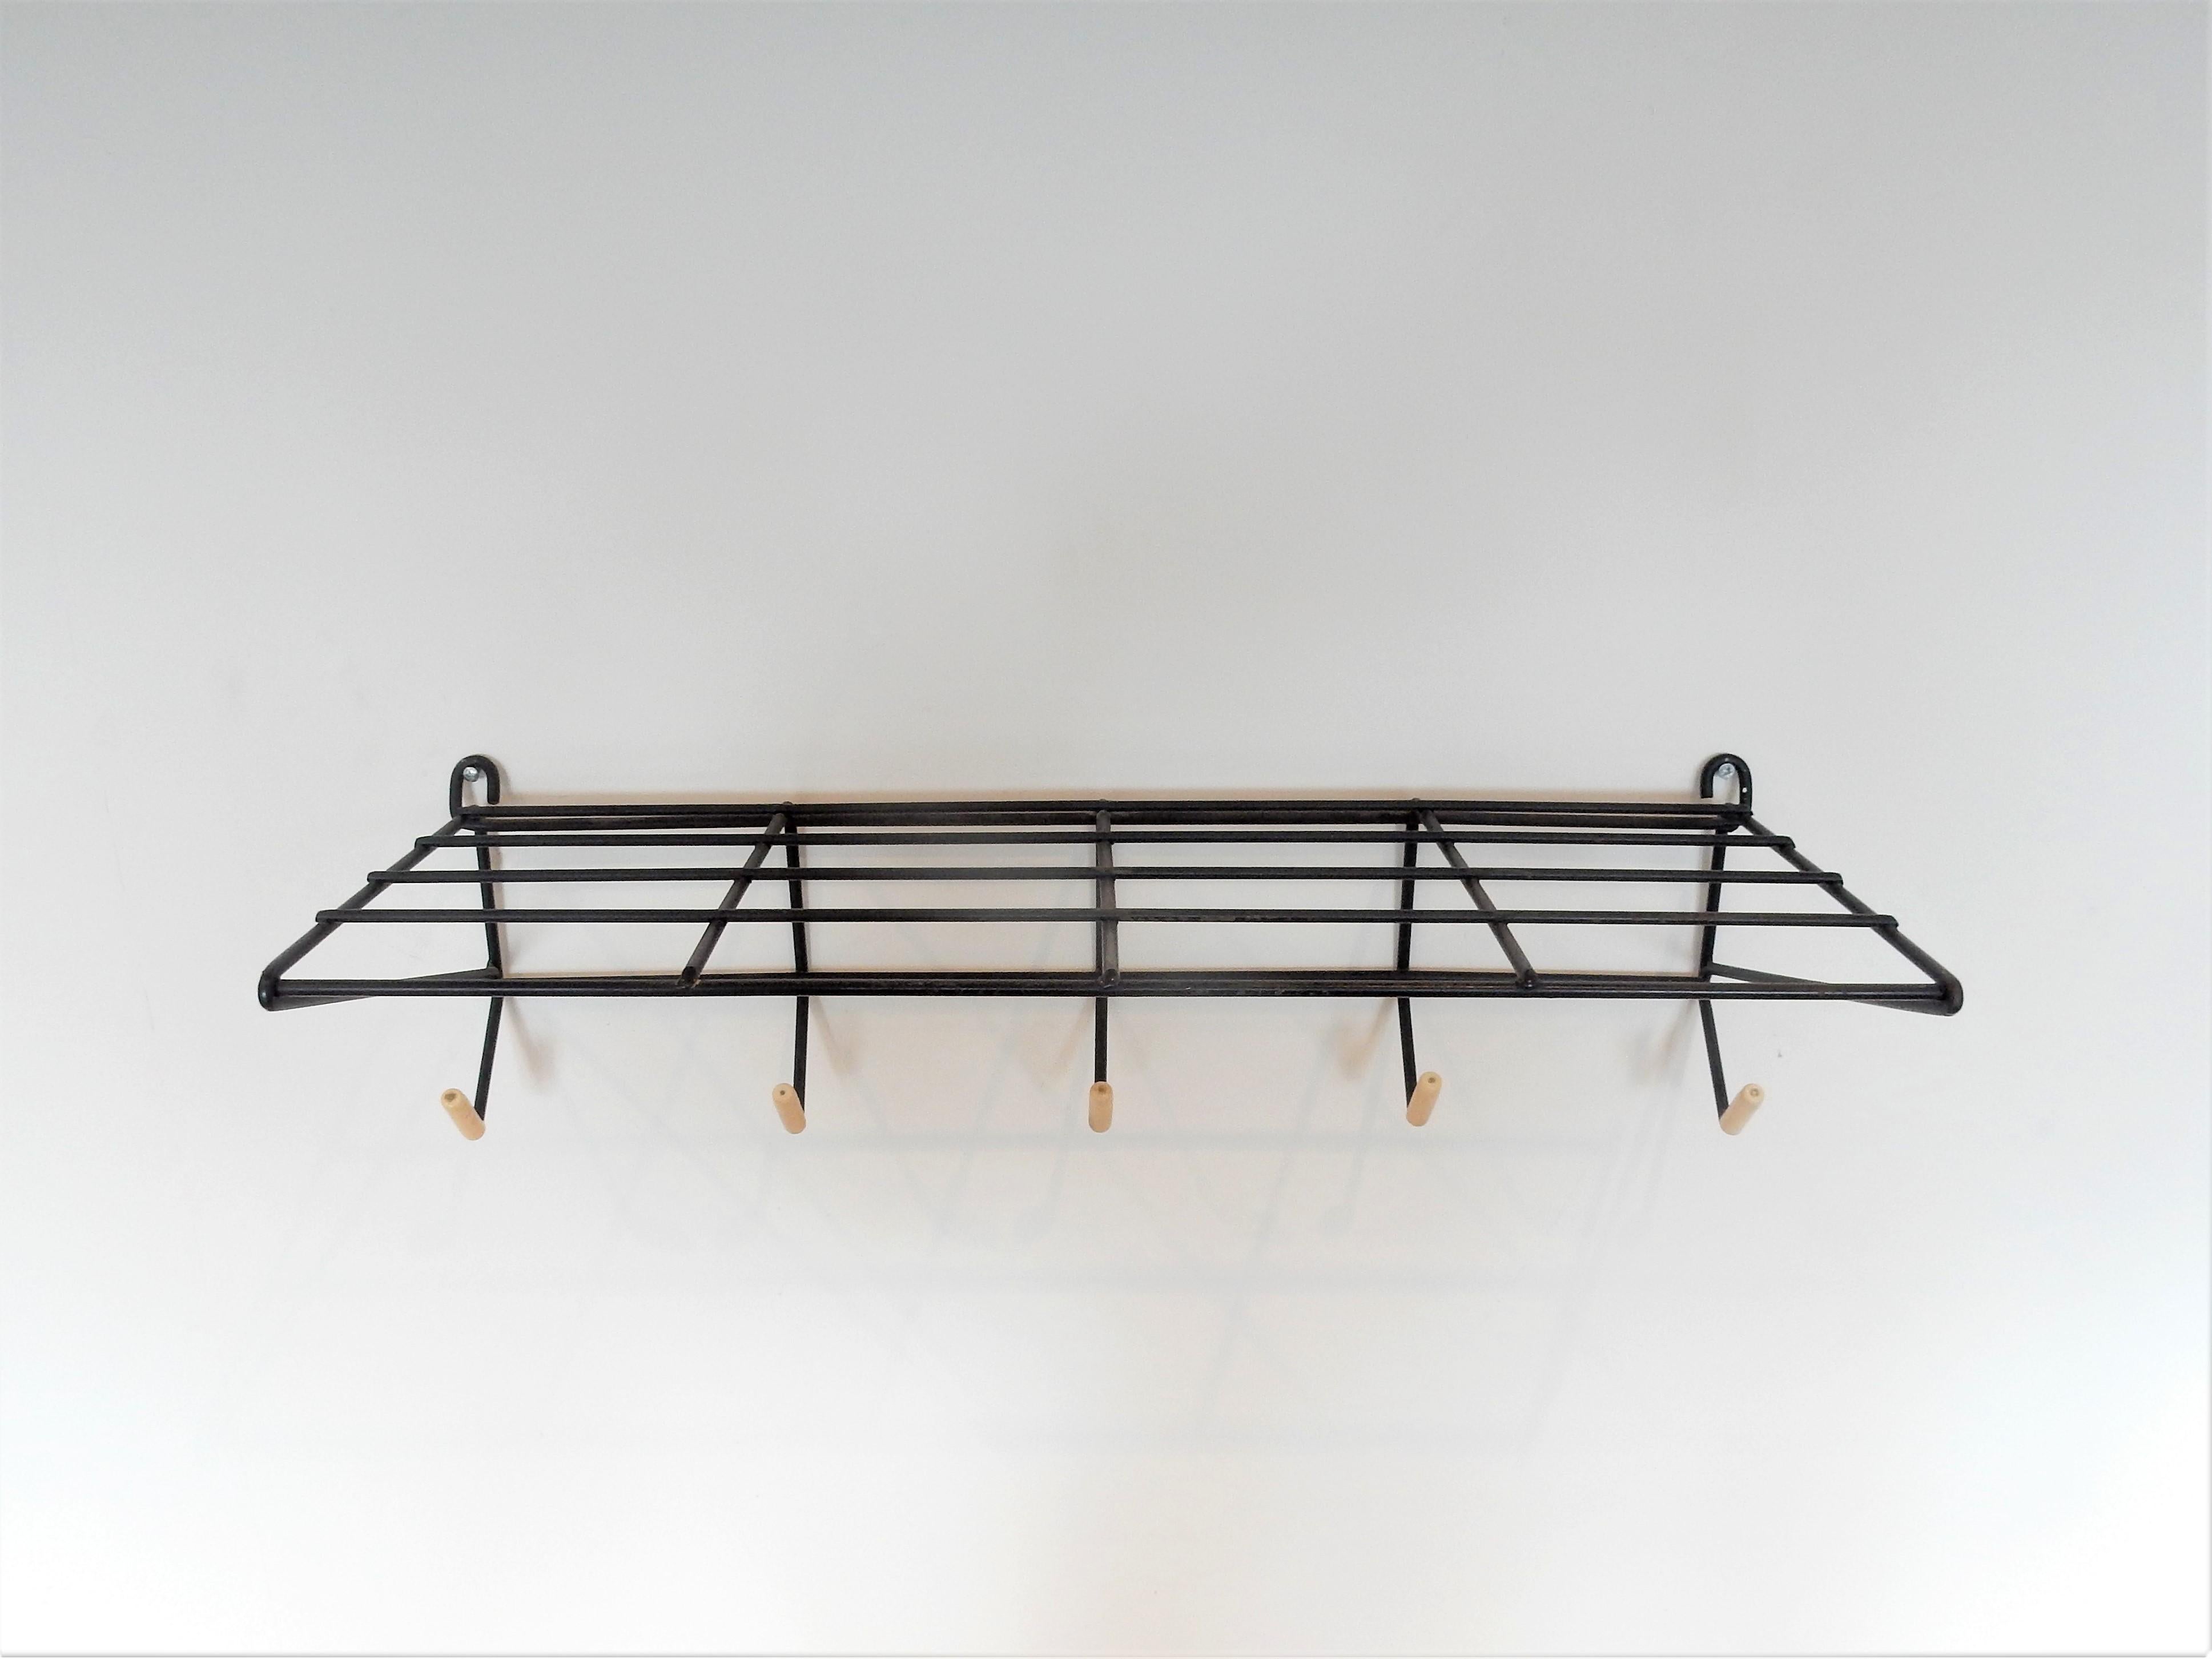 This fabulous coat rack was designed by Friso Kramer for 't Spectrum in 1954. The designs of Friso Kramer are much sought after. This particular one is of black lacquered metal with white plastic knobs on the hooks. A solid designed construction